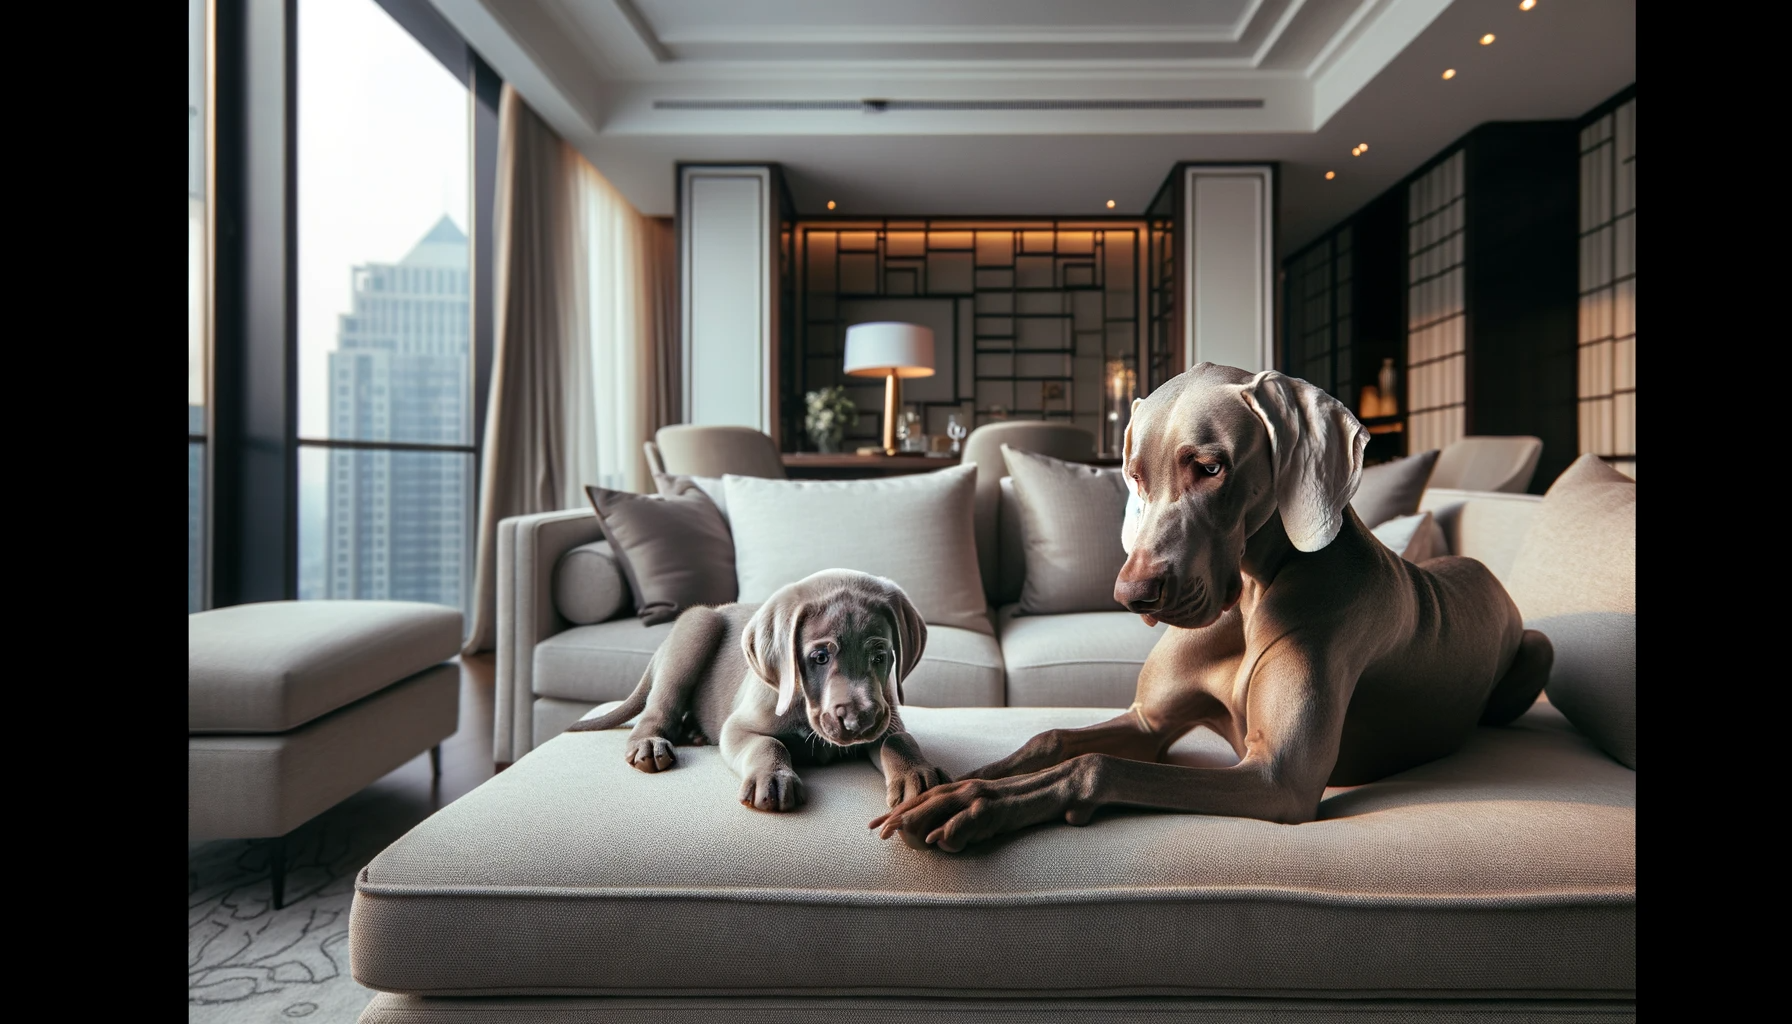 Weimaraner parent elegantly lounging with a playful Labmaraner pup at its side